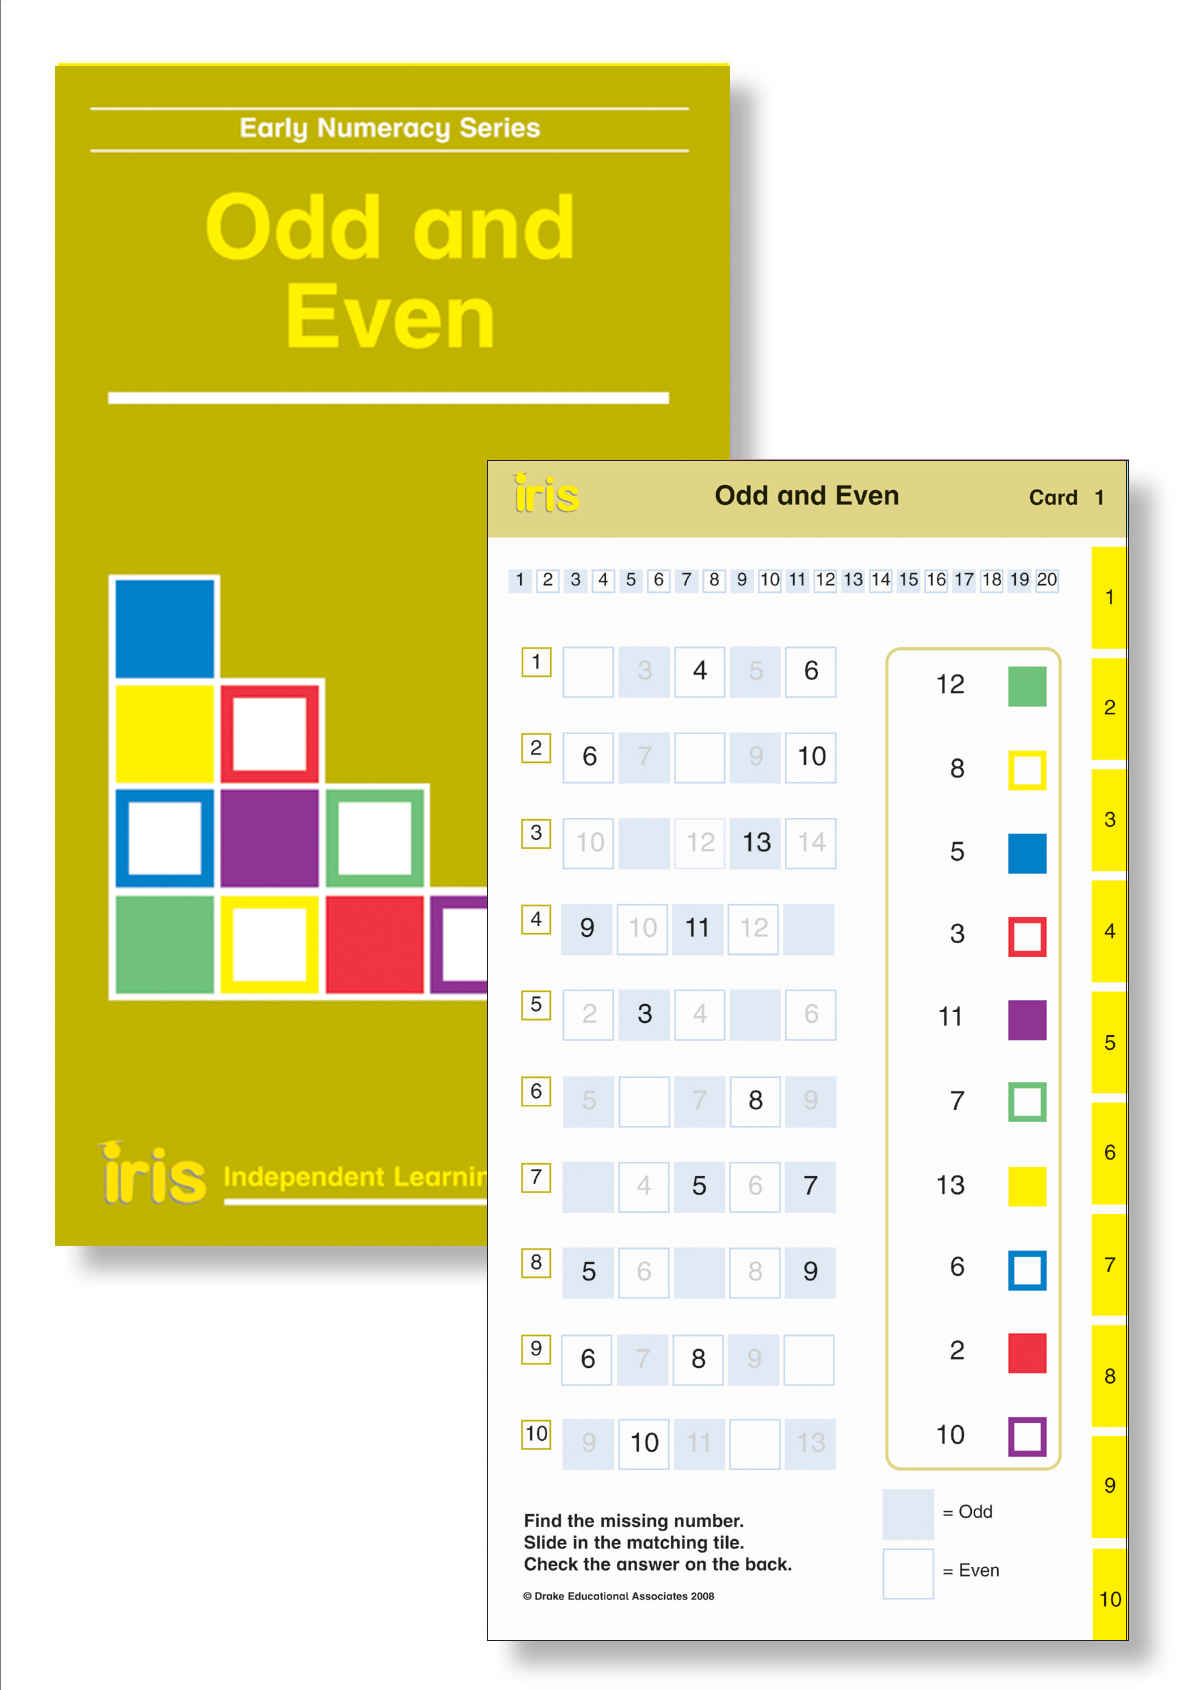 Iris Study Cards: Early Numeracy Year 1 - Odd and Even